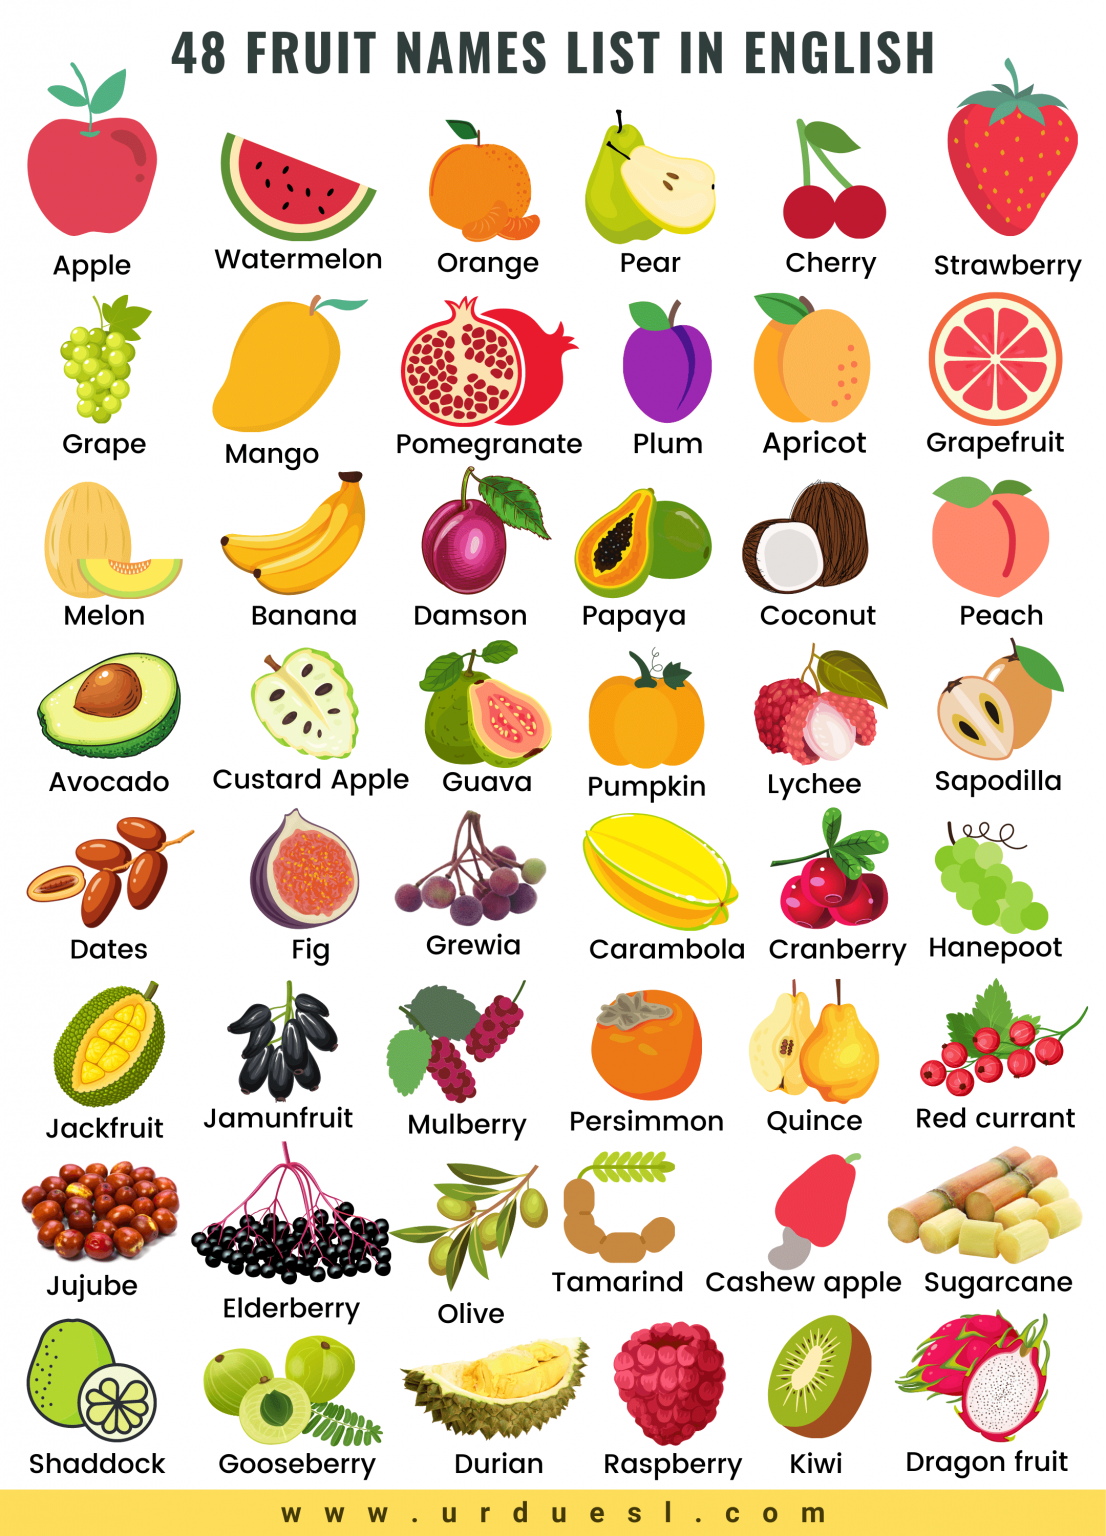 all-fruit-names-list-in-english-with-pictures-download-pdf